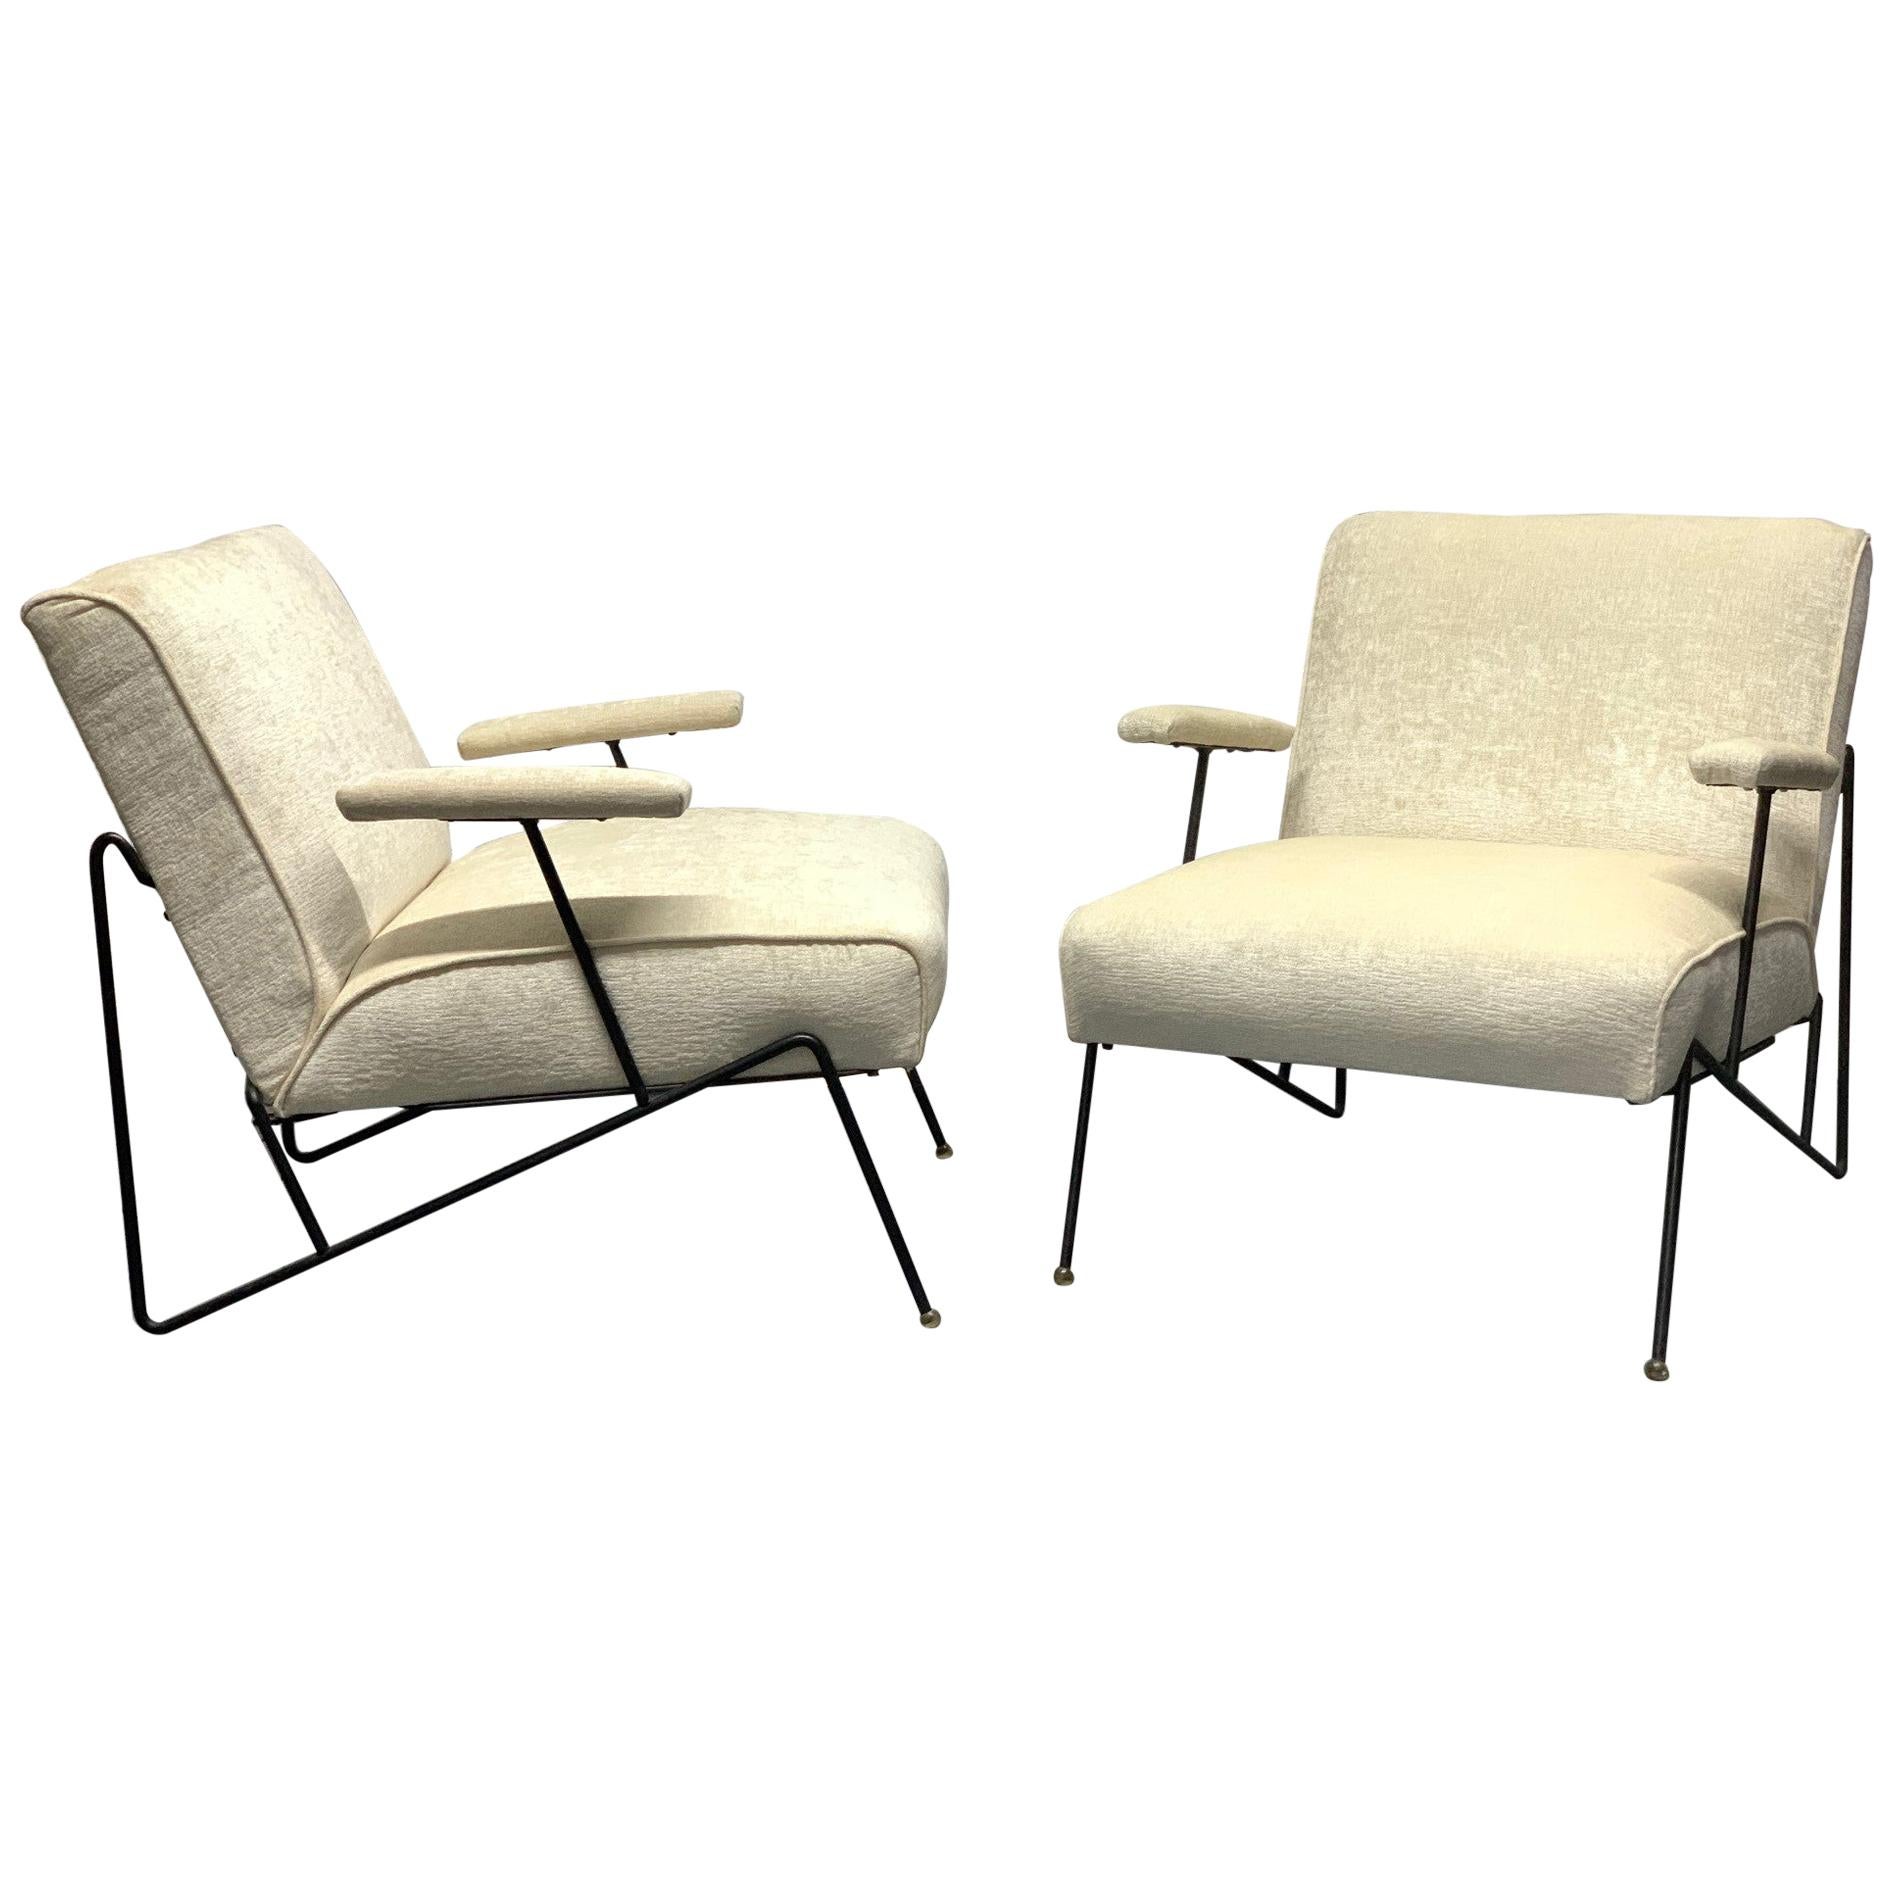 Pair of Wrought Iron Lounge Chairs by Maurizio Tempestini for Salterini